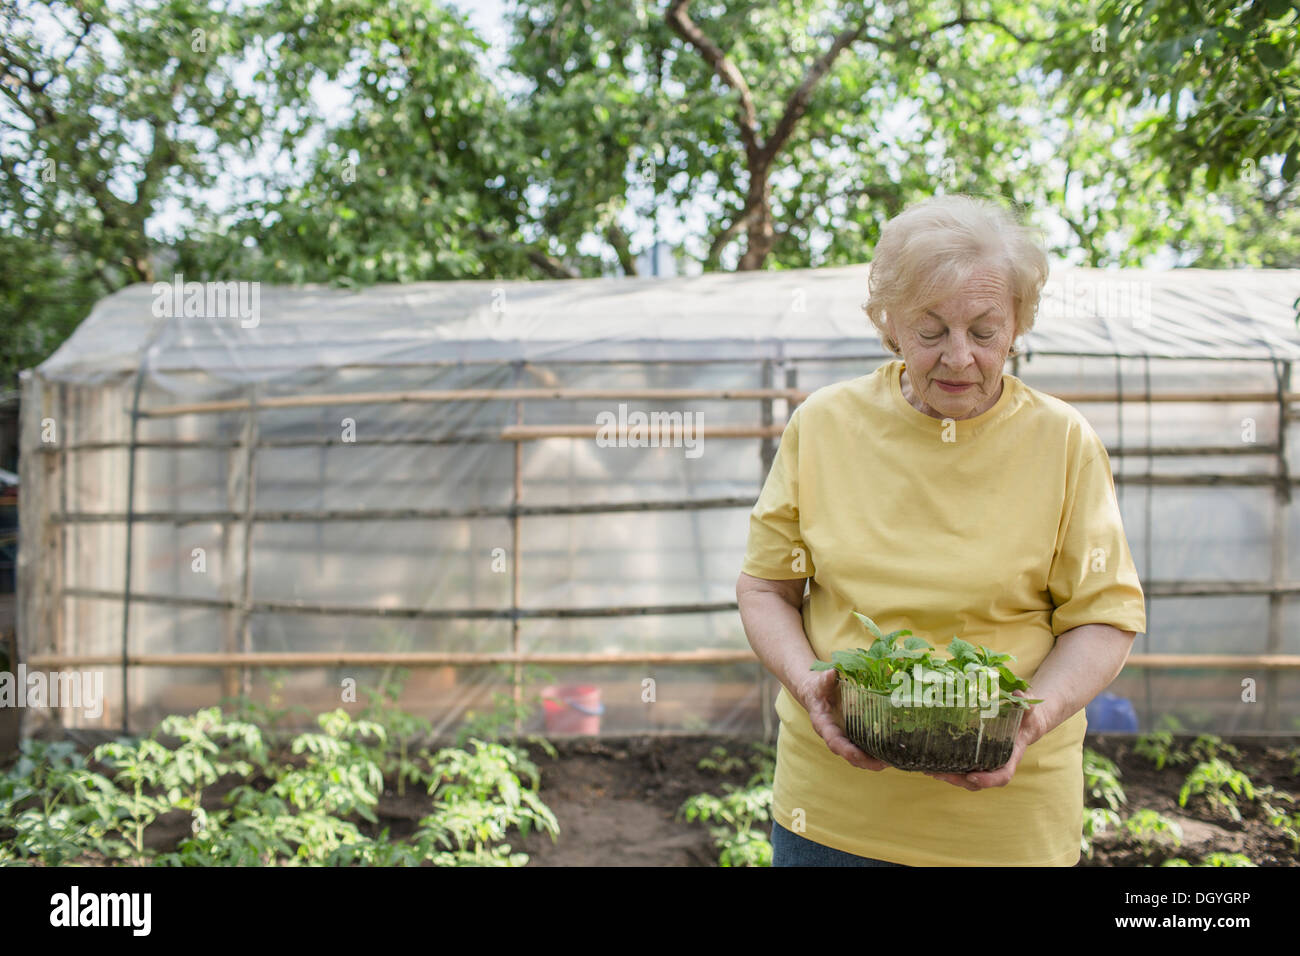 A senior woman gardening, greenhouse in background Stock Photo